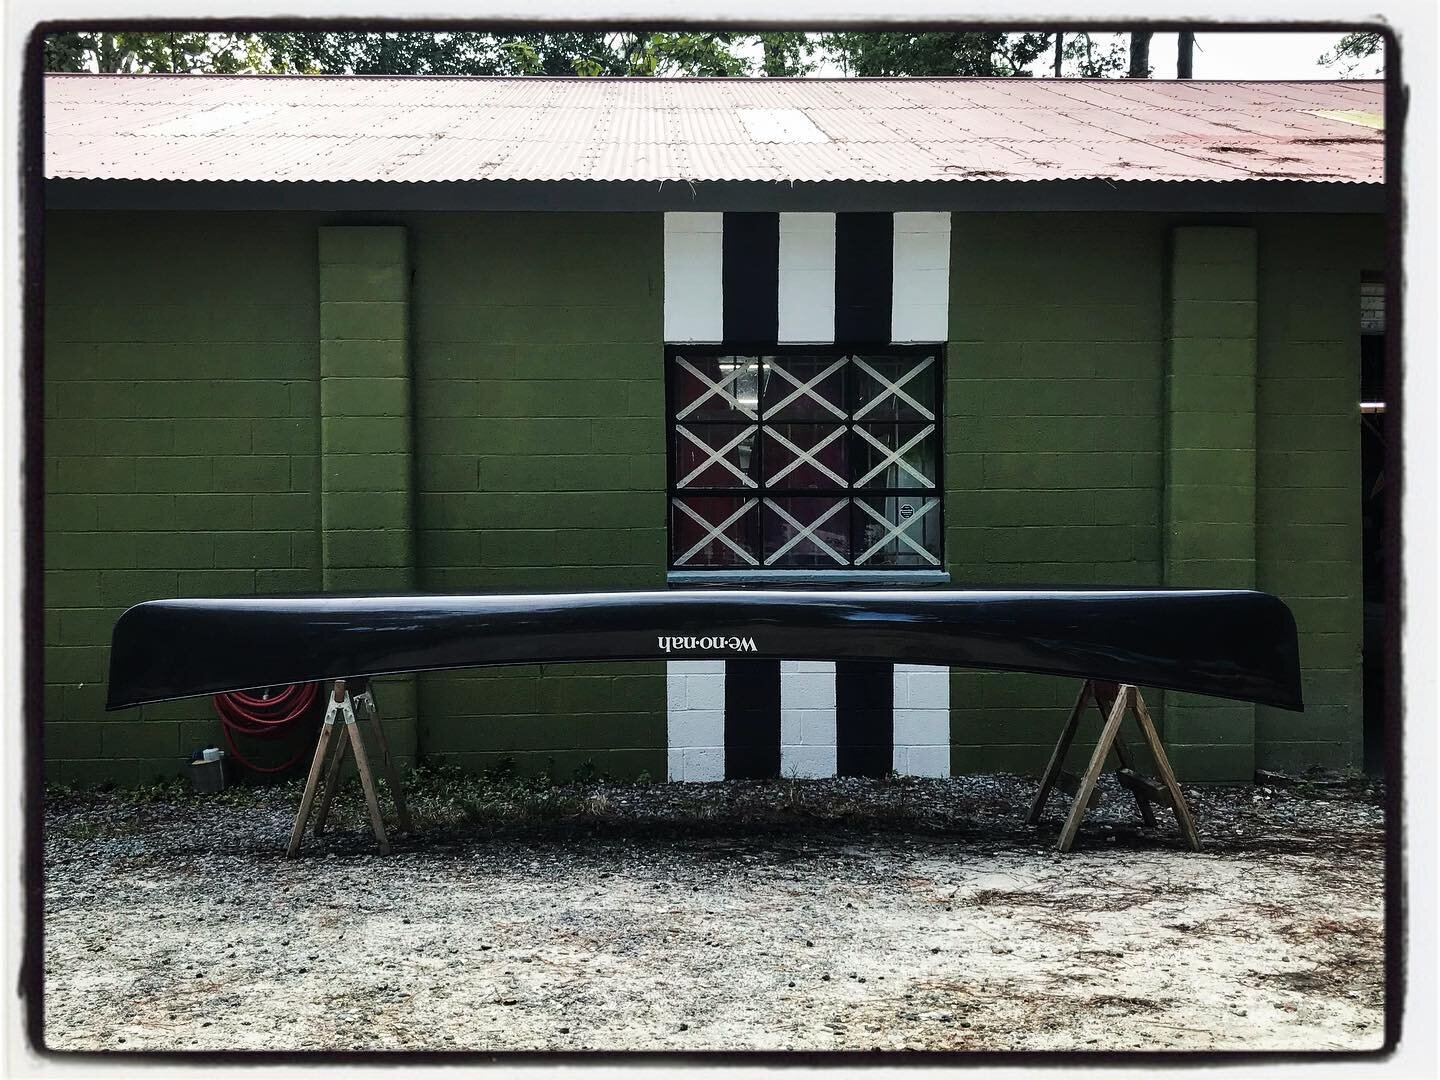 The Champ.
@wenonah_canoe Champlain measuring in at 18ft x3ft and weighing in at 46 lbs. If there was ever one boat that can do it all, this is as close as it comes.